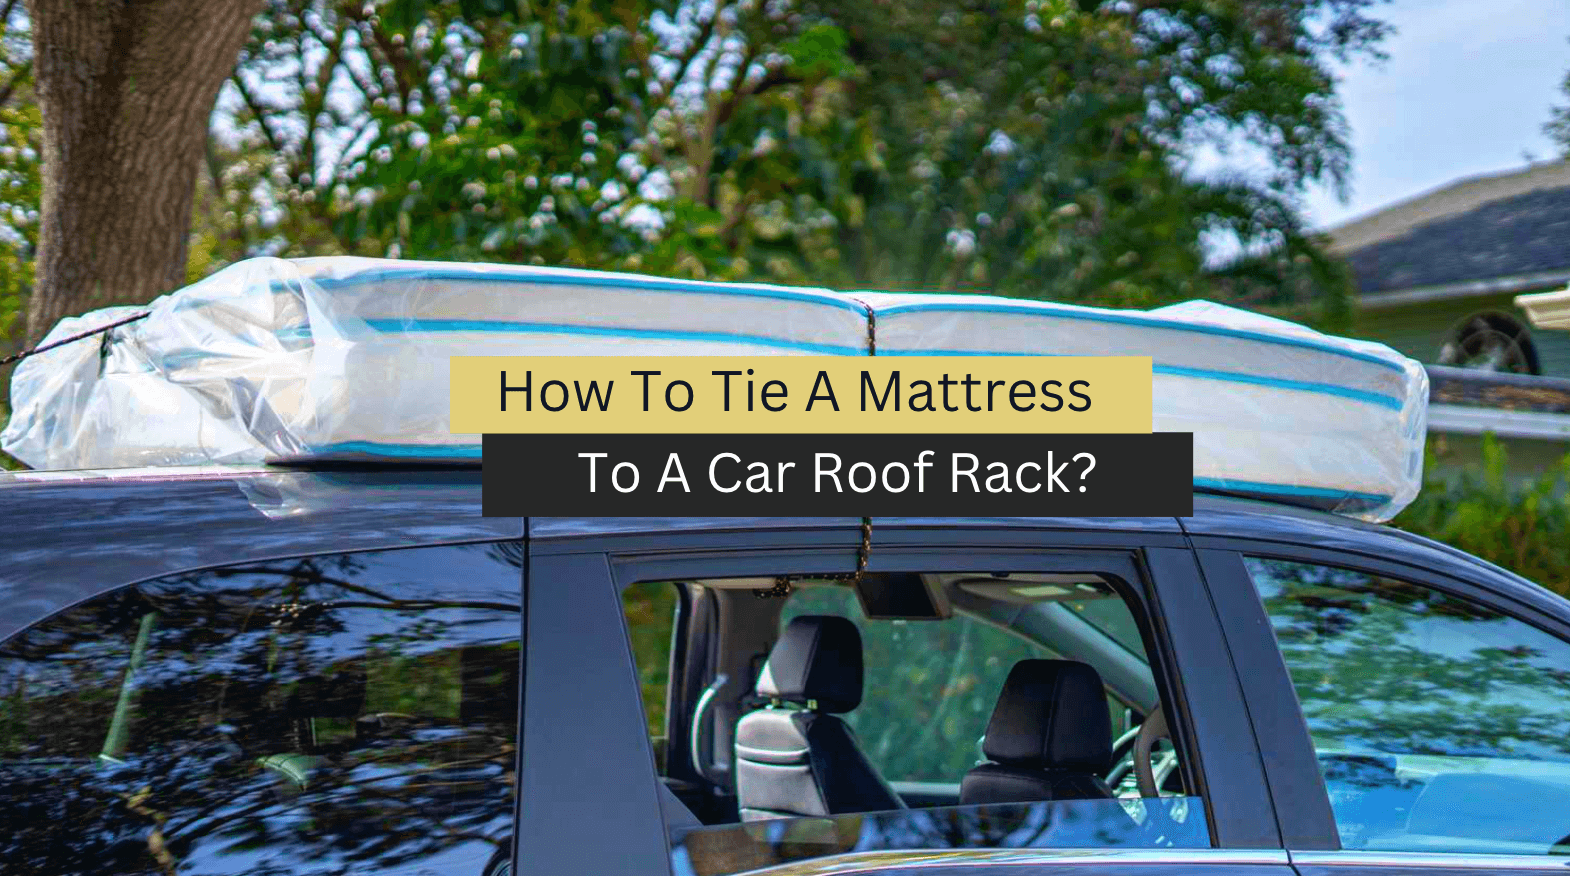 How To Tie A Mattress To A Car Roof Rack? (Step-By-Step Guide)